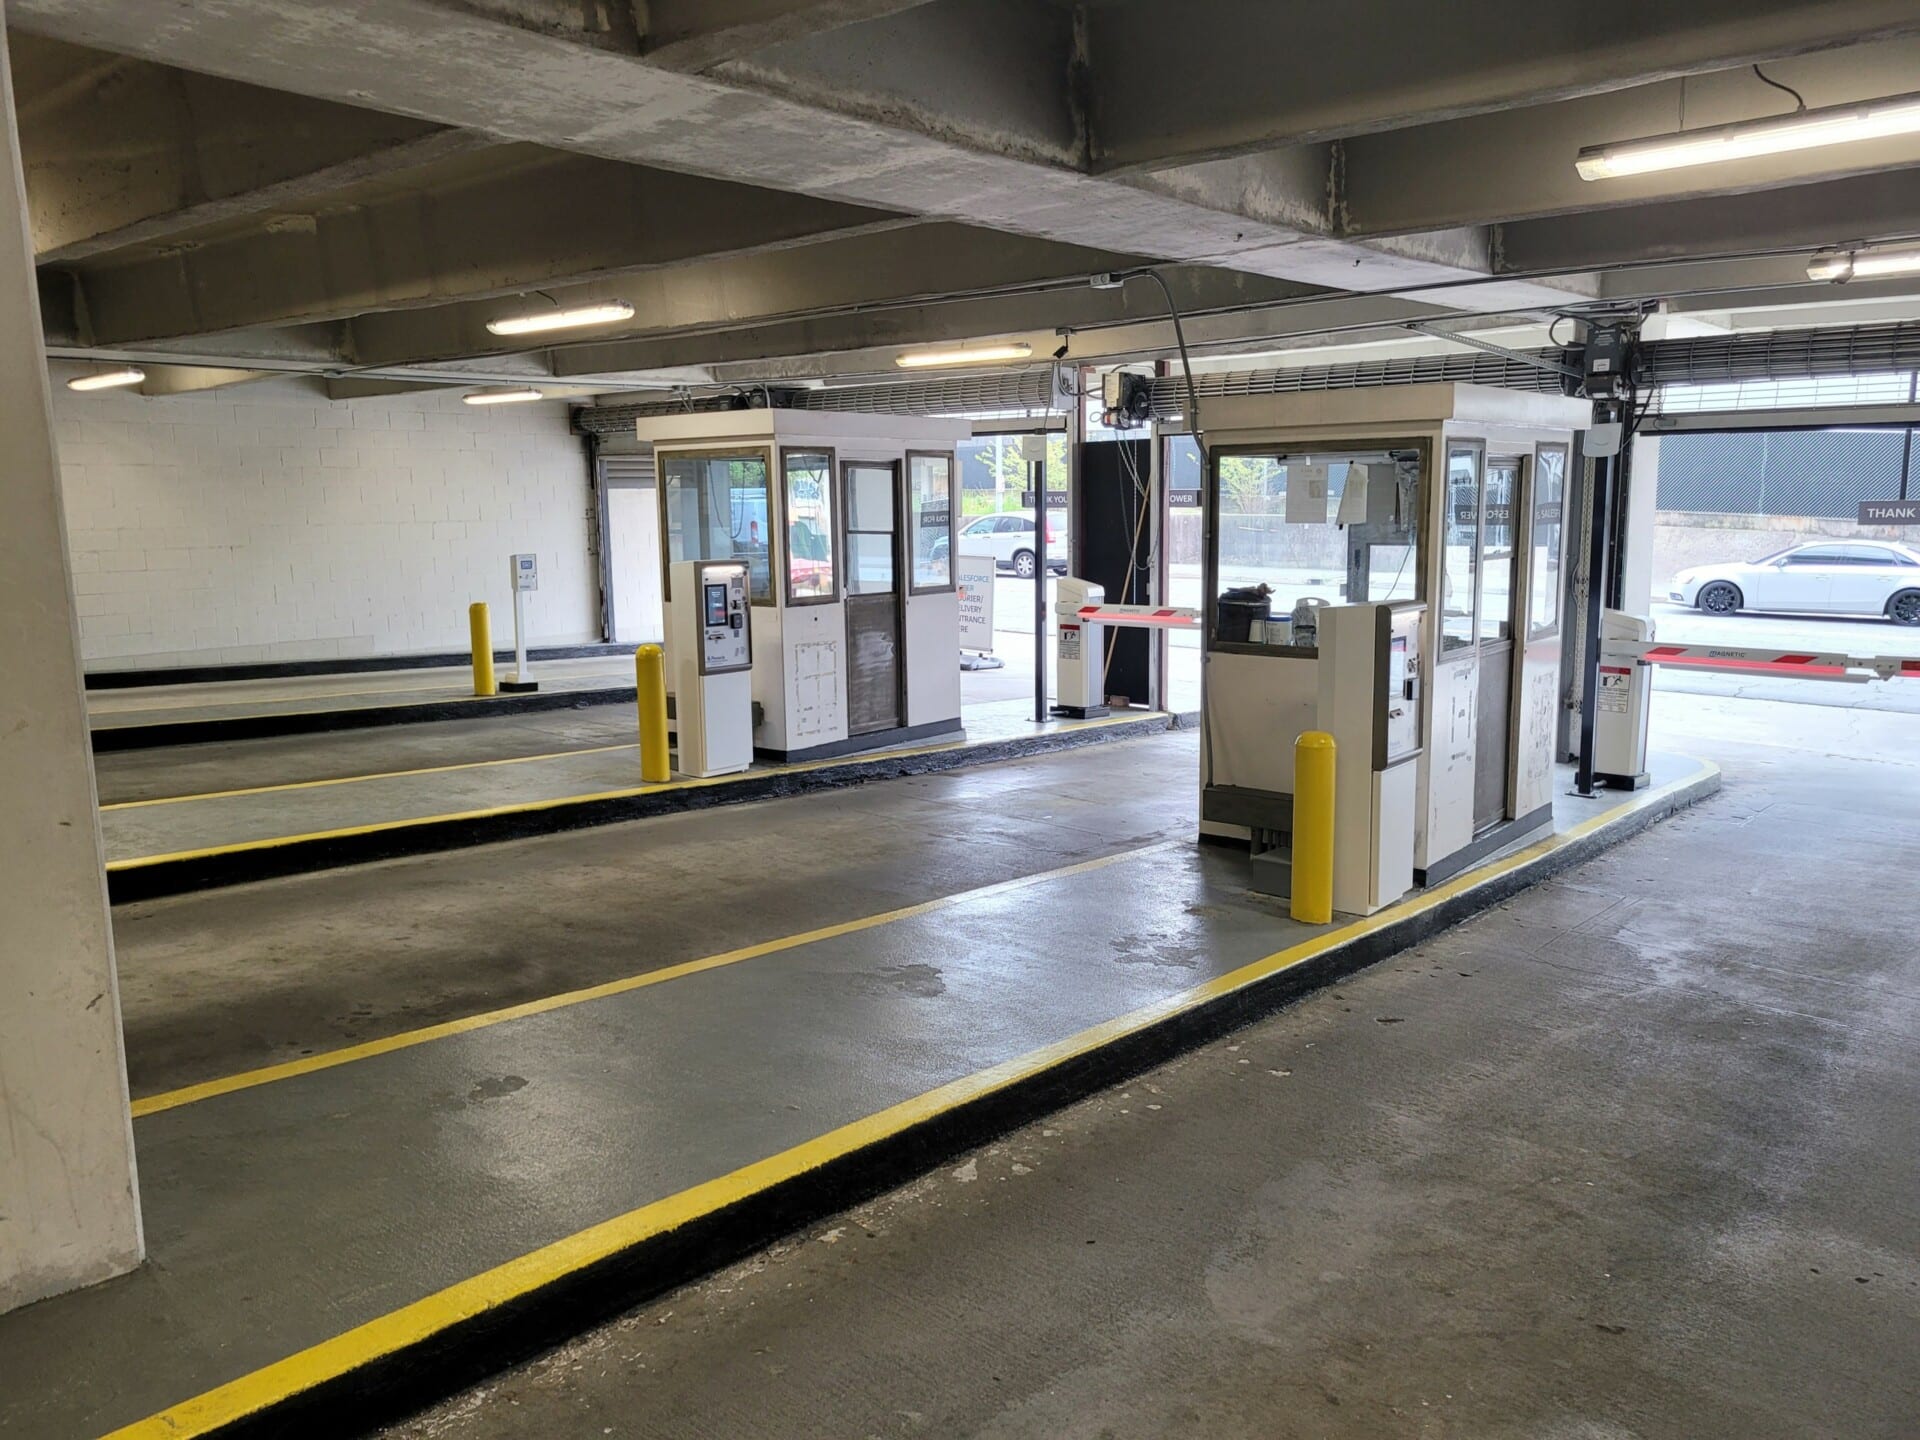 Security guard booths sit on two lanes shown for secure parking access and exiting.